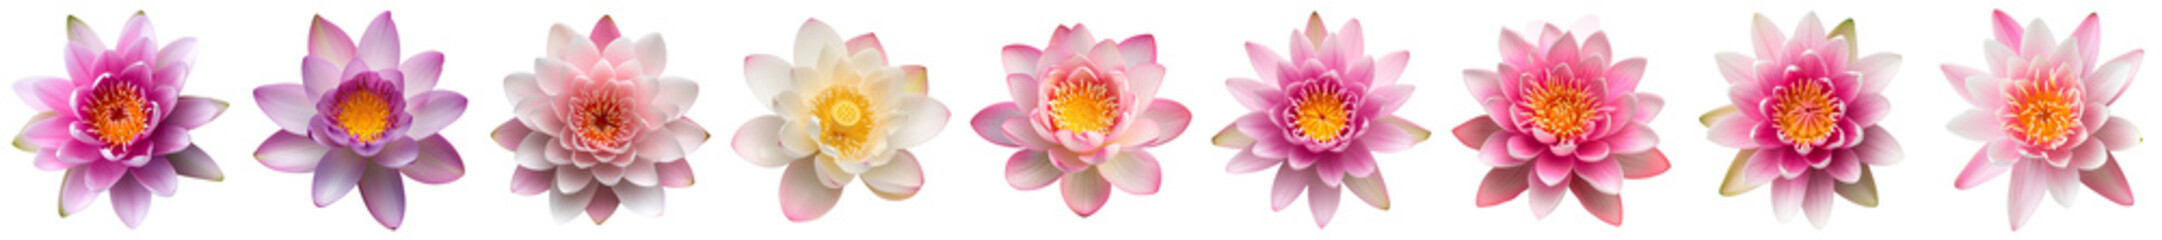 Assorted water lilies on a transparent background, showcasing a range of pink hues, perfect for spring-themed designs and decor